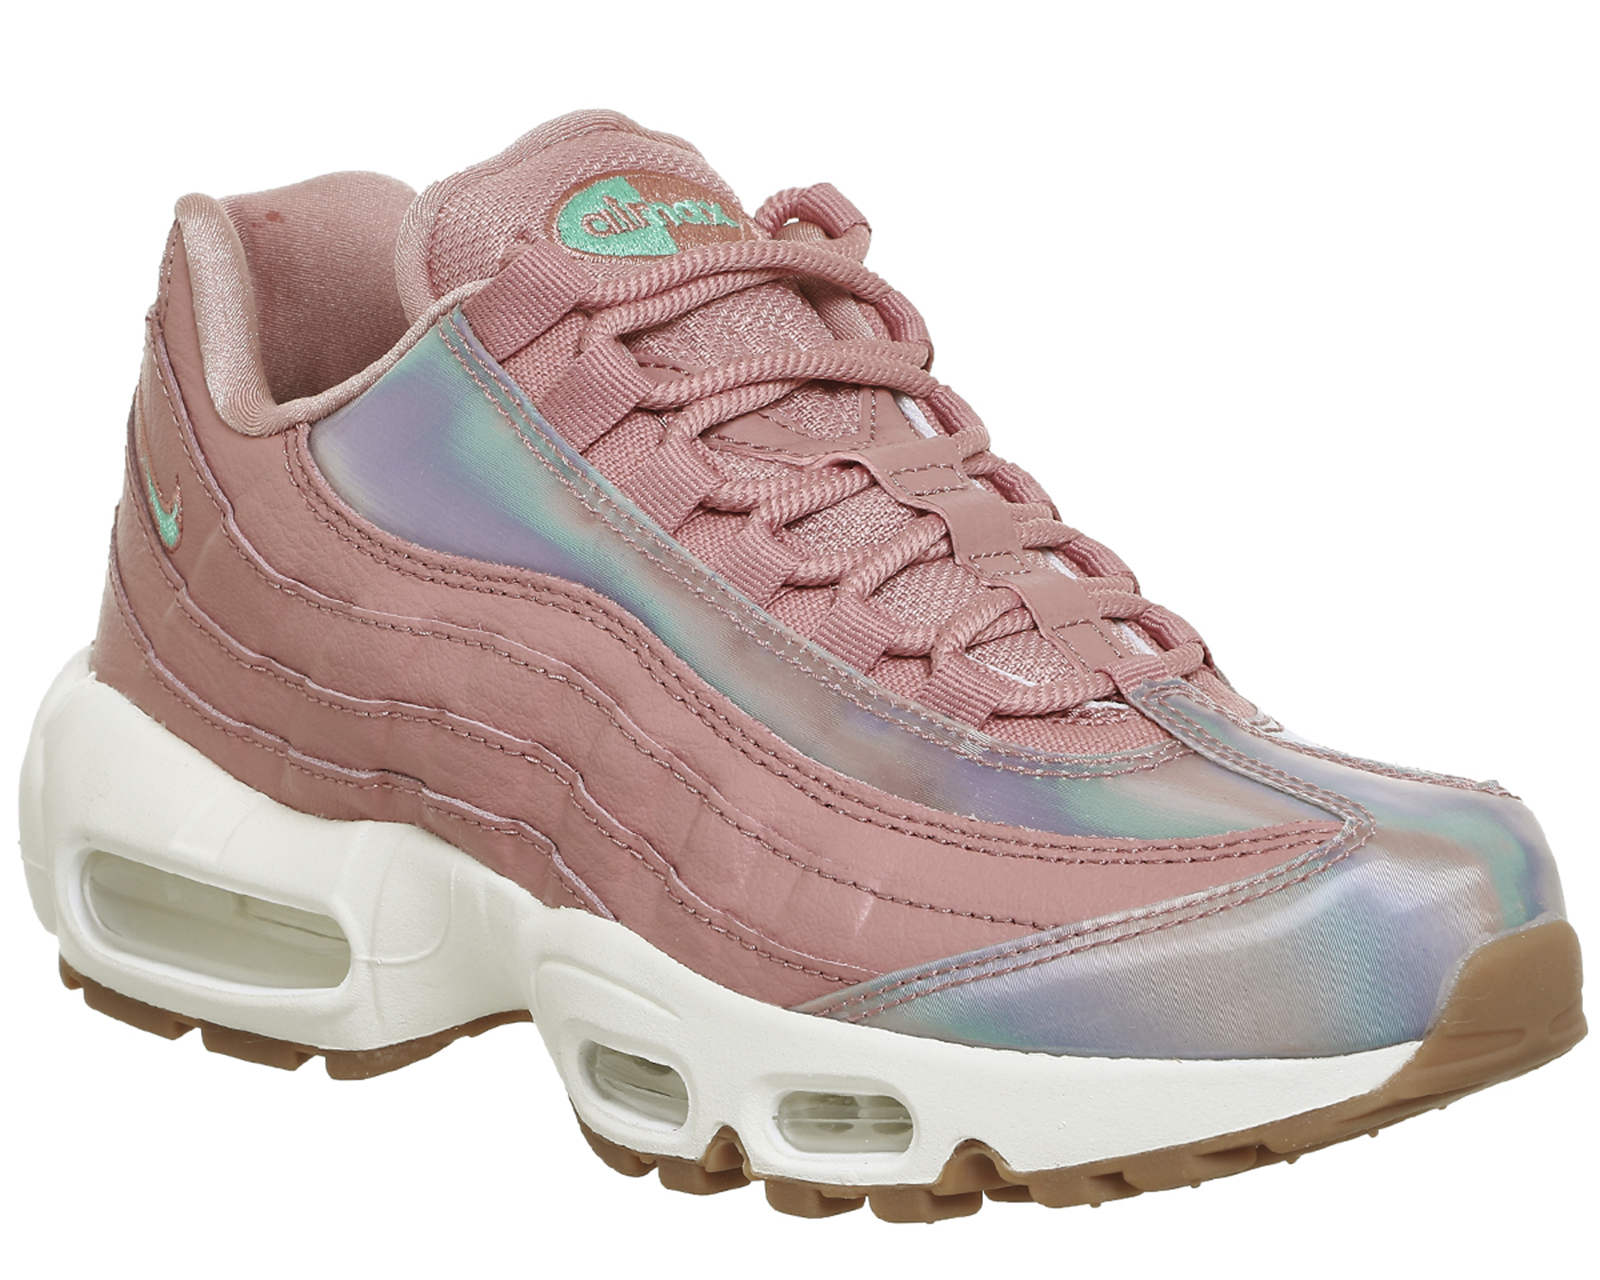 NikeAir Max 95Red Stardust Teal Irridescent